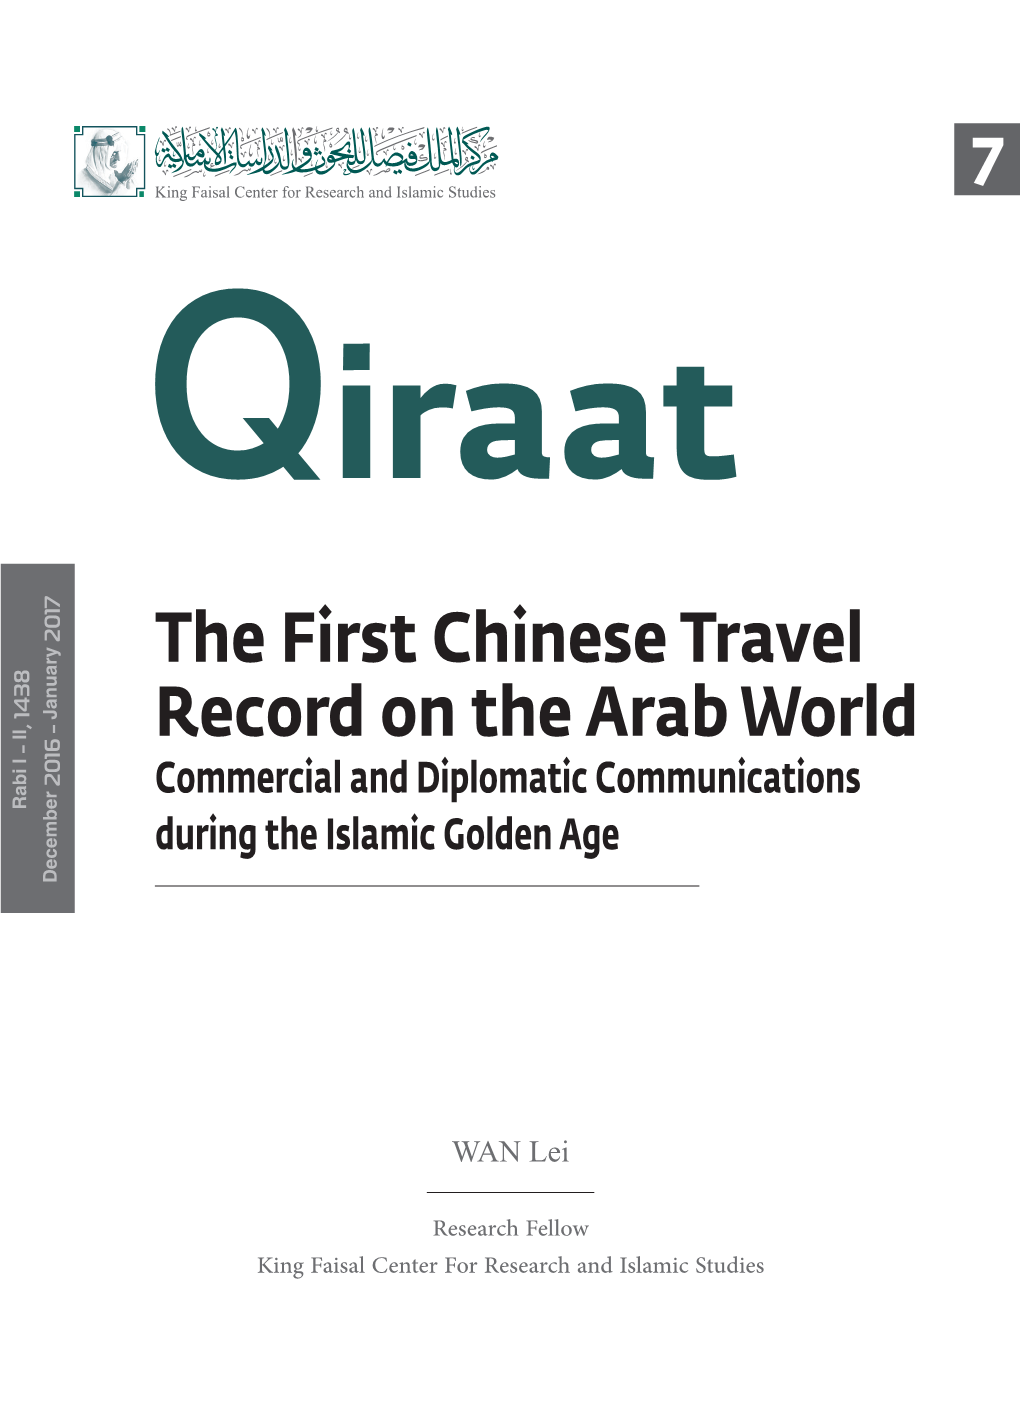 The First Chinese Travel Record on the Arab World Commercial and Diplomatic Communications During the Islamic Golden Age